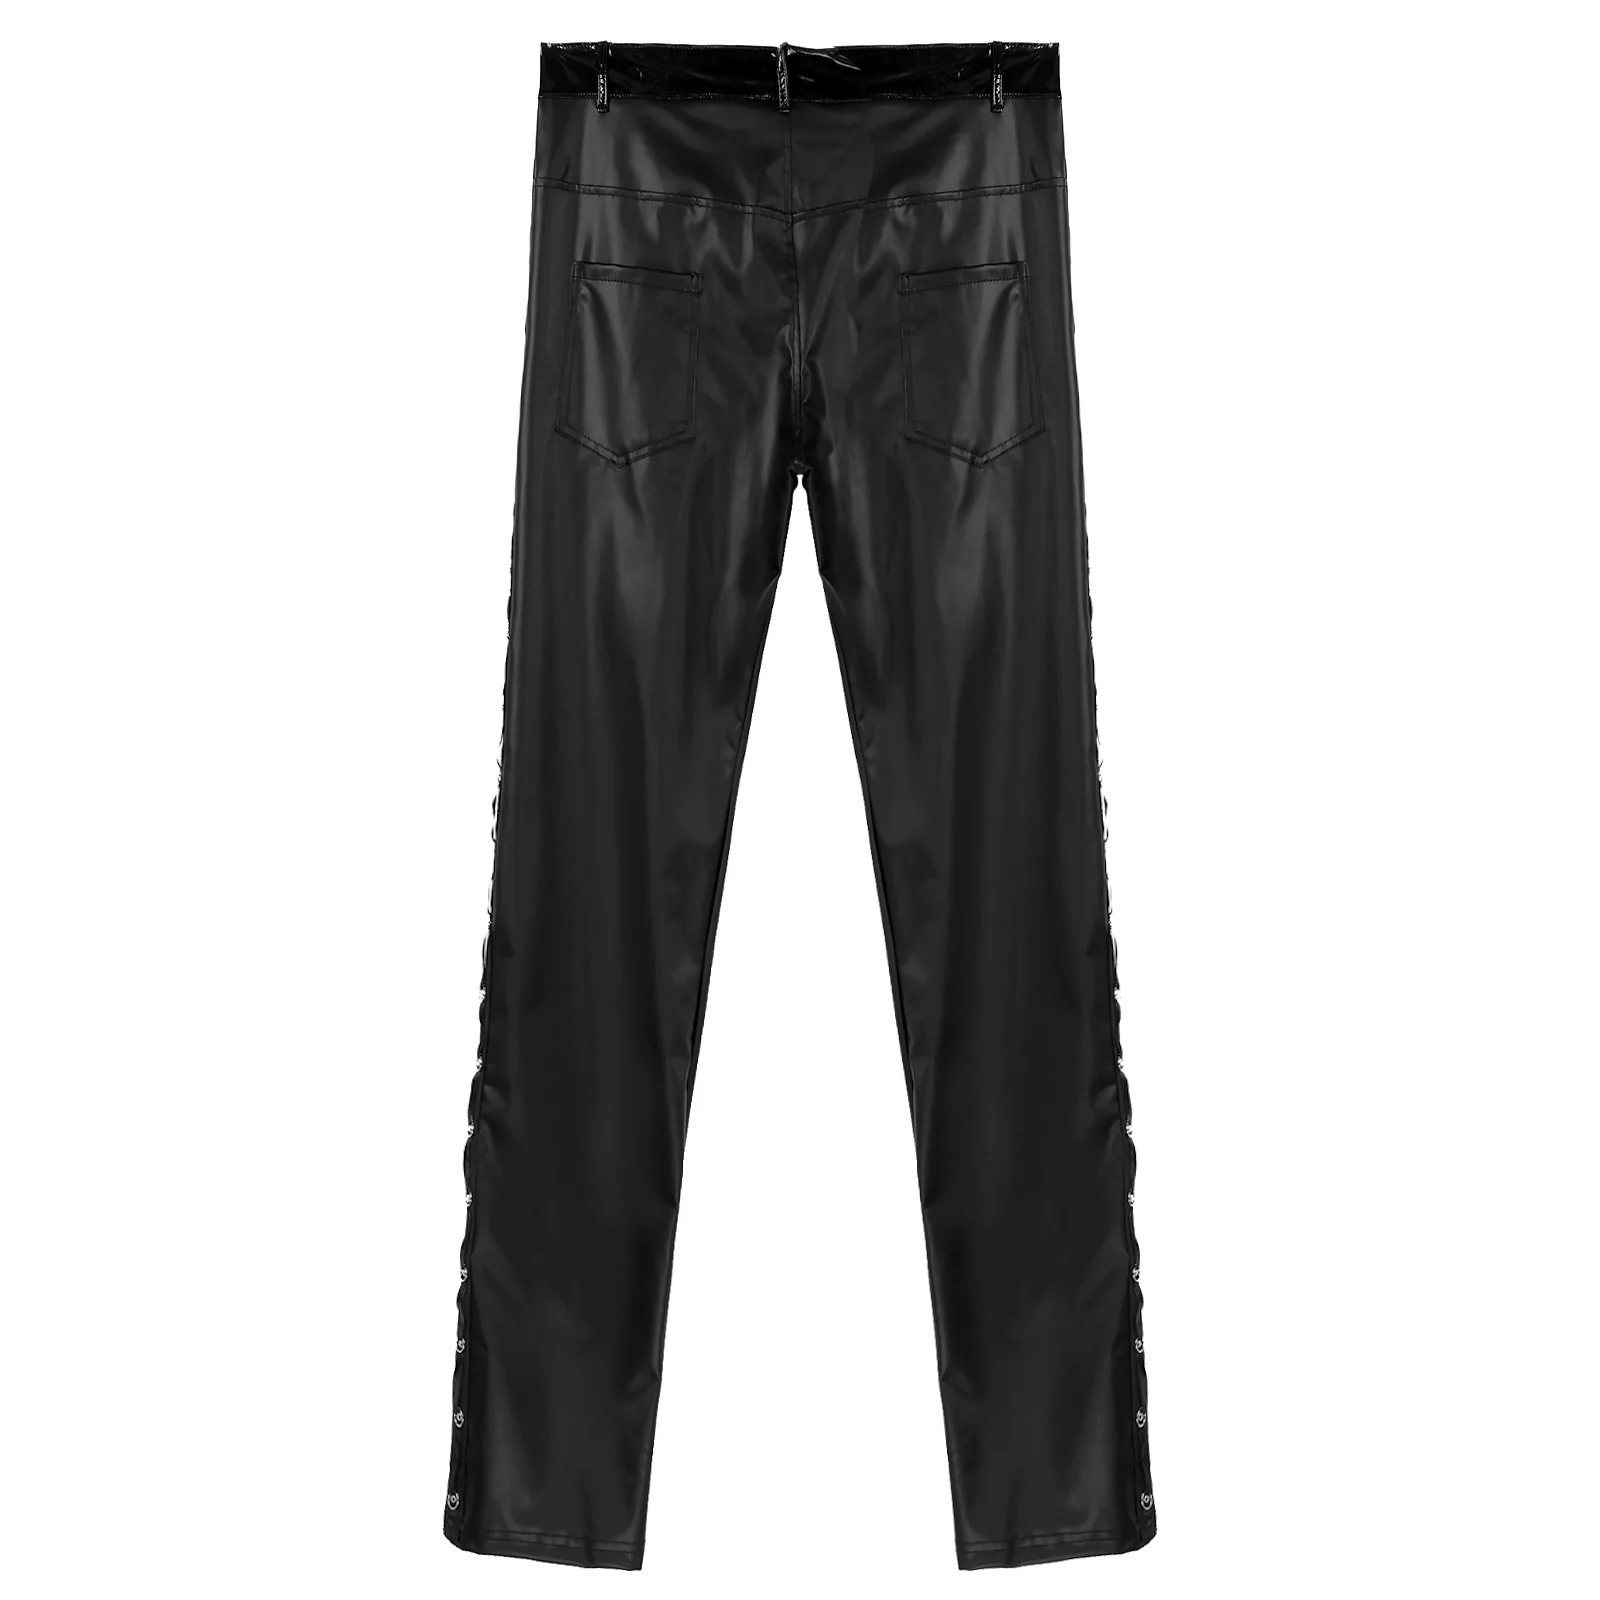 Men Latex Leather Pants Low Waist Faux Leather Shiny Pants Fashion Tight Trousers for Club Stage Show Rock Band Performance images - 6